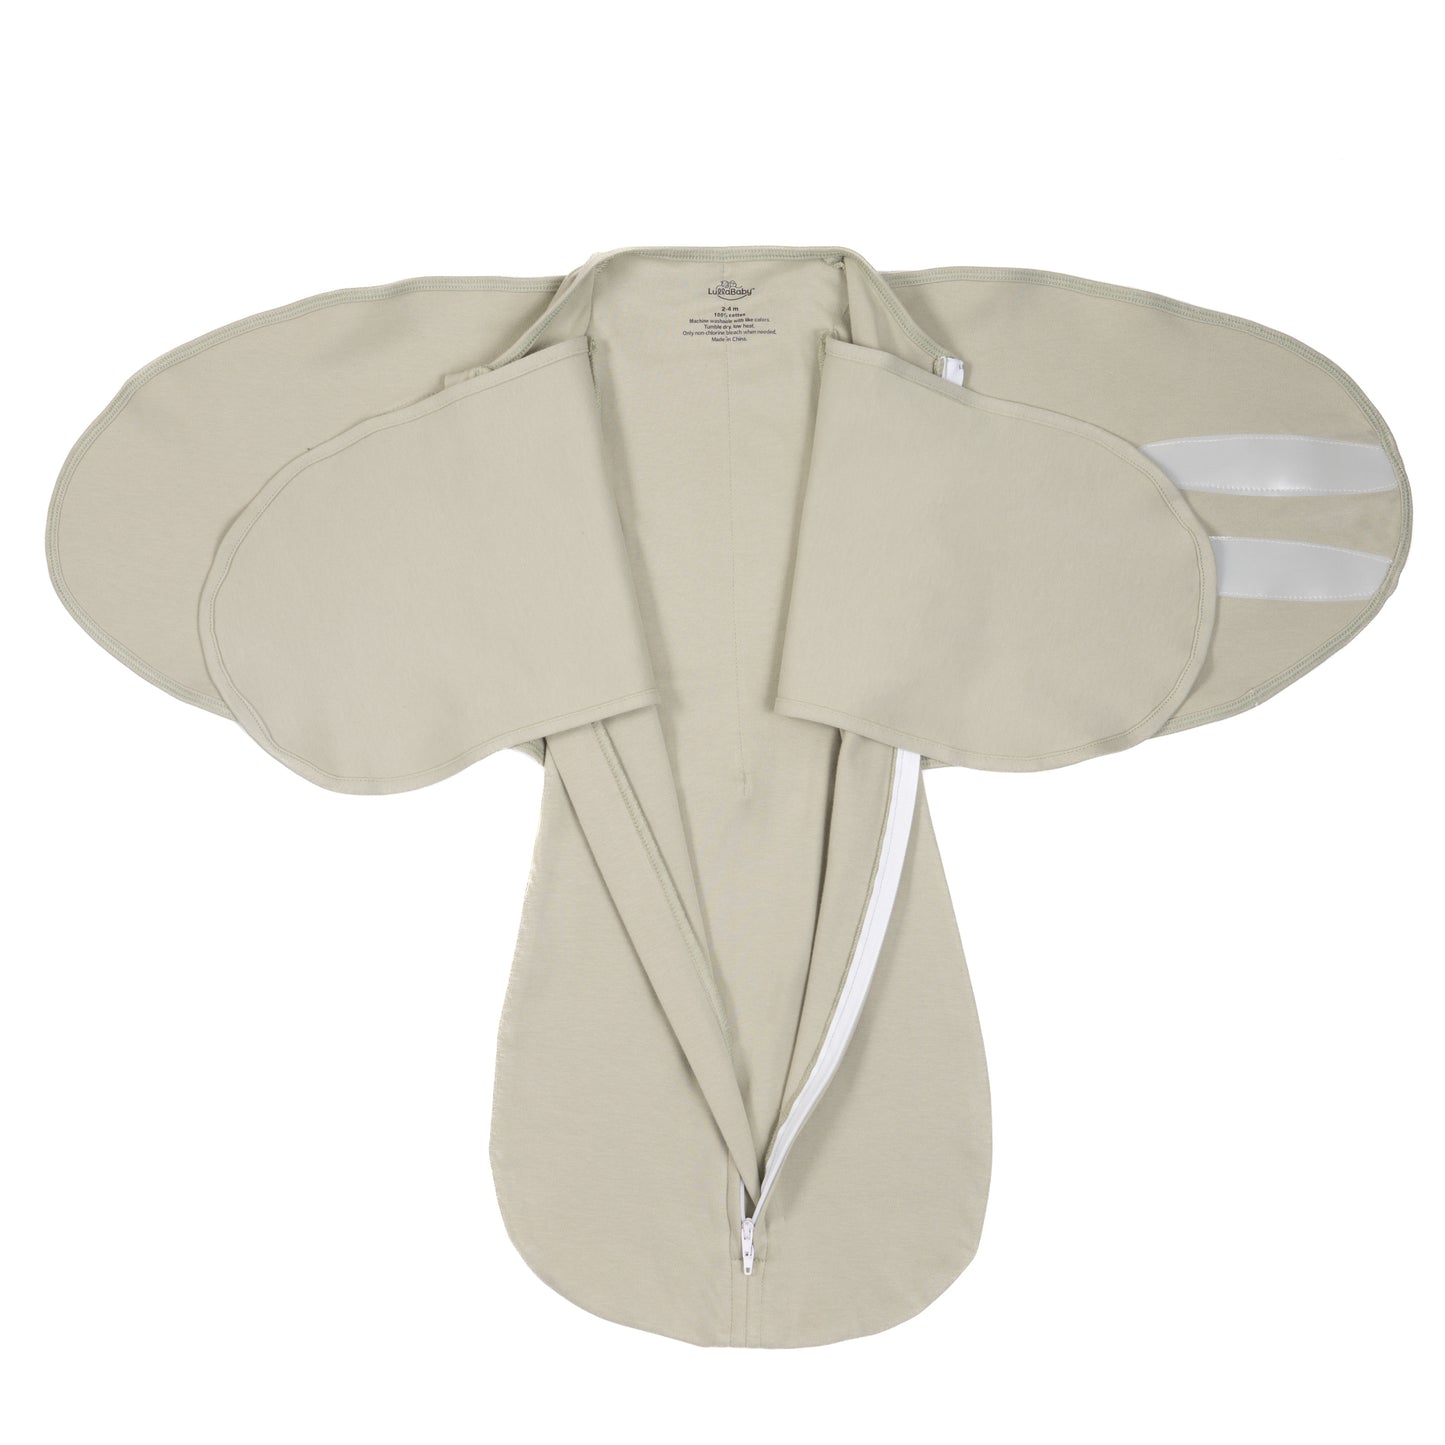 "LullaBaby Swaddle in Desert Sage color, perfect newborn sleep solution